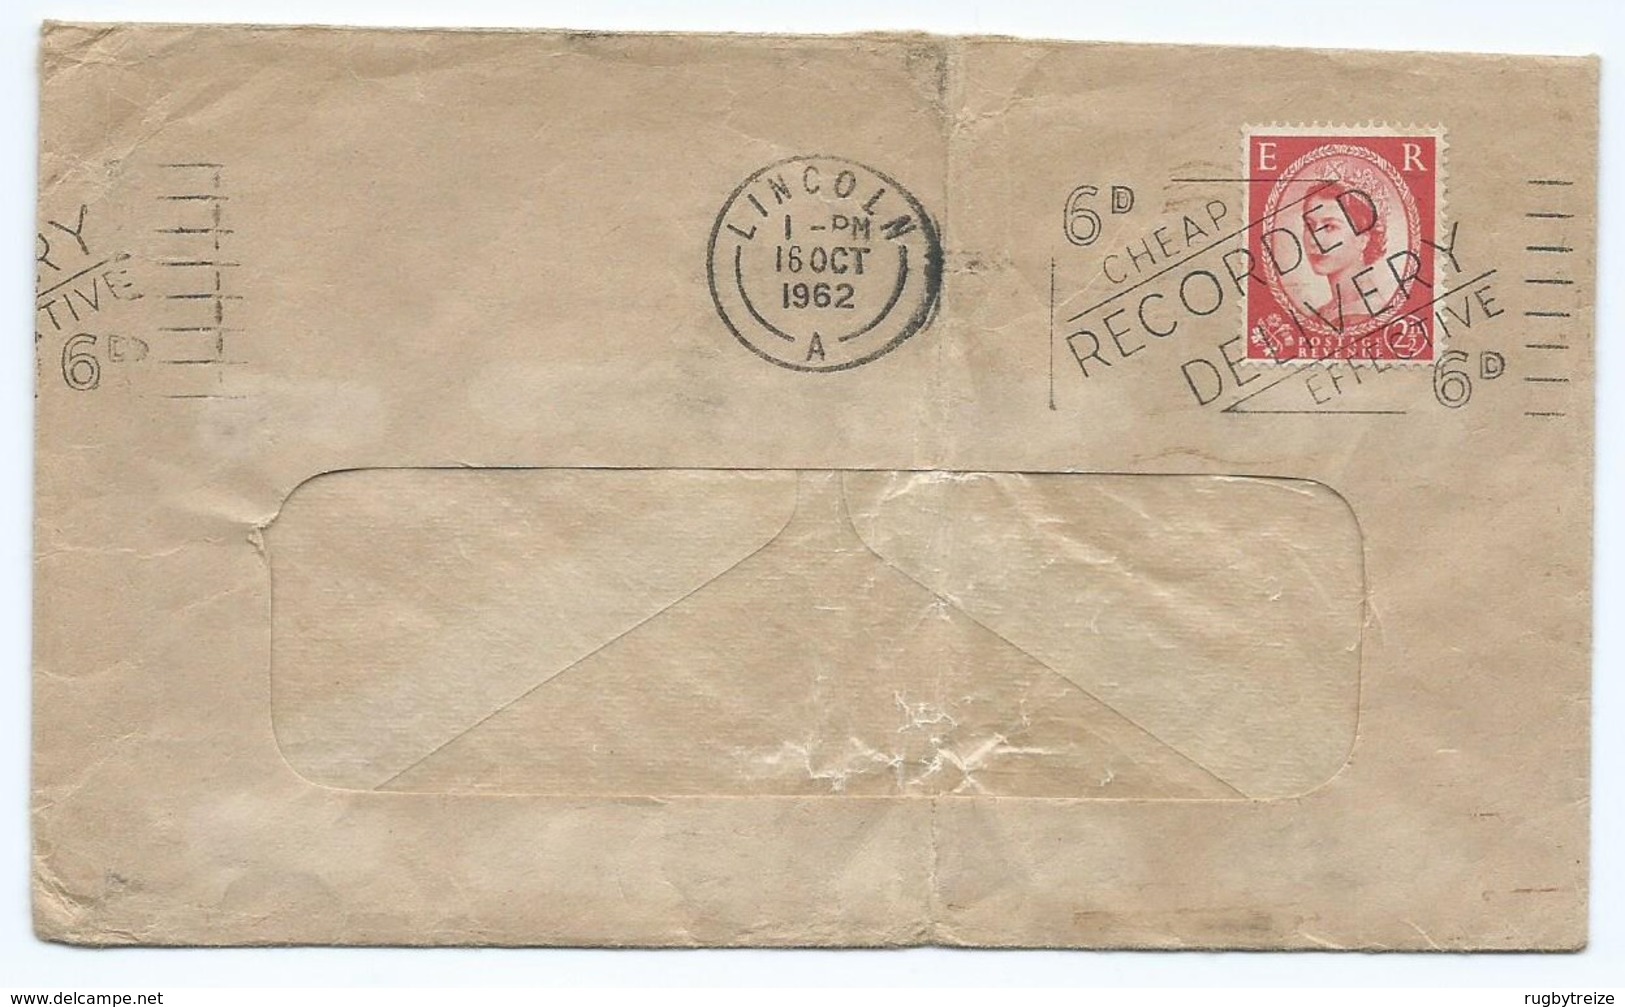 3284 - Enveloppe Queen Elizabeth - 16/10/1962 Lincoln Flamme Cheap Recorded Delivery - Storia Postale